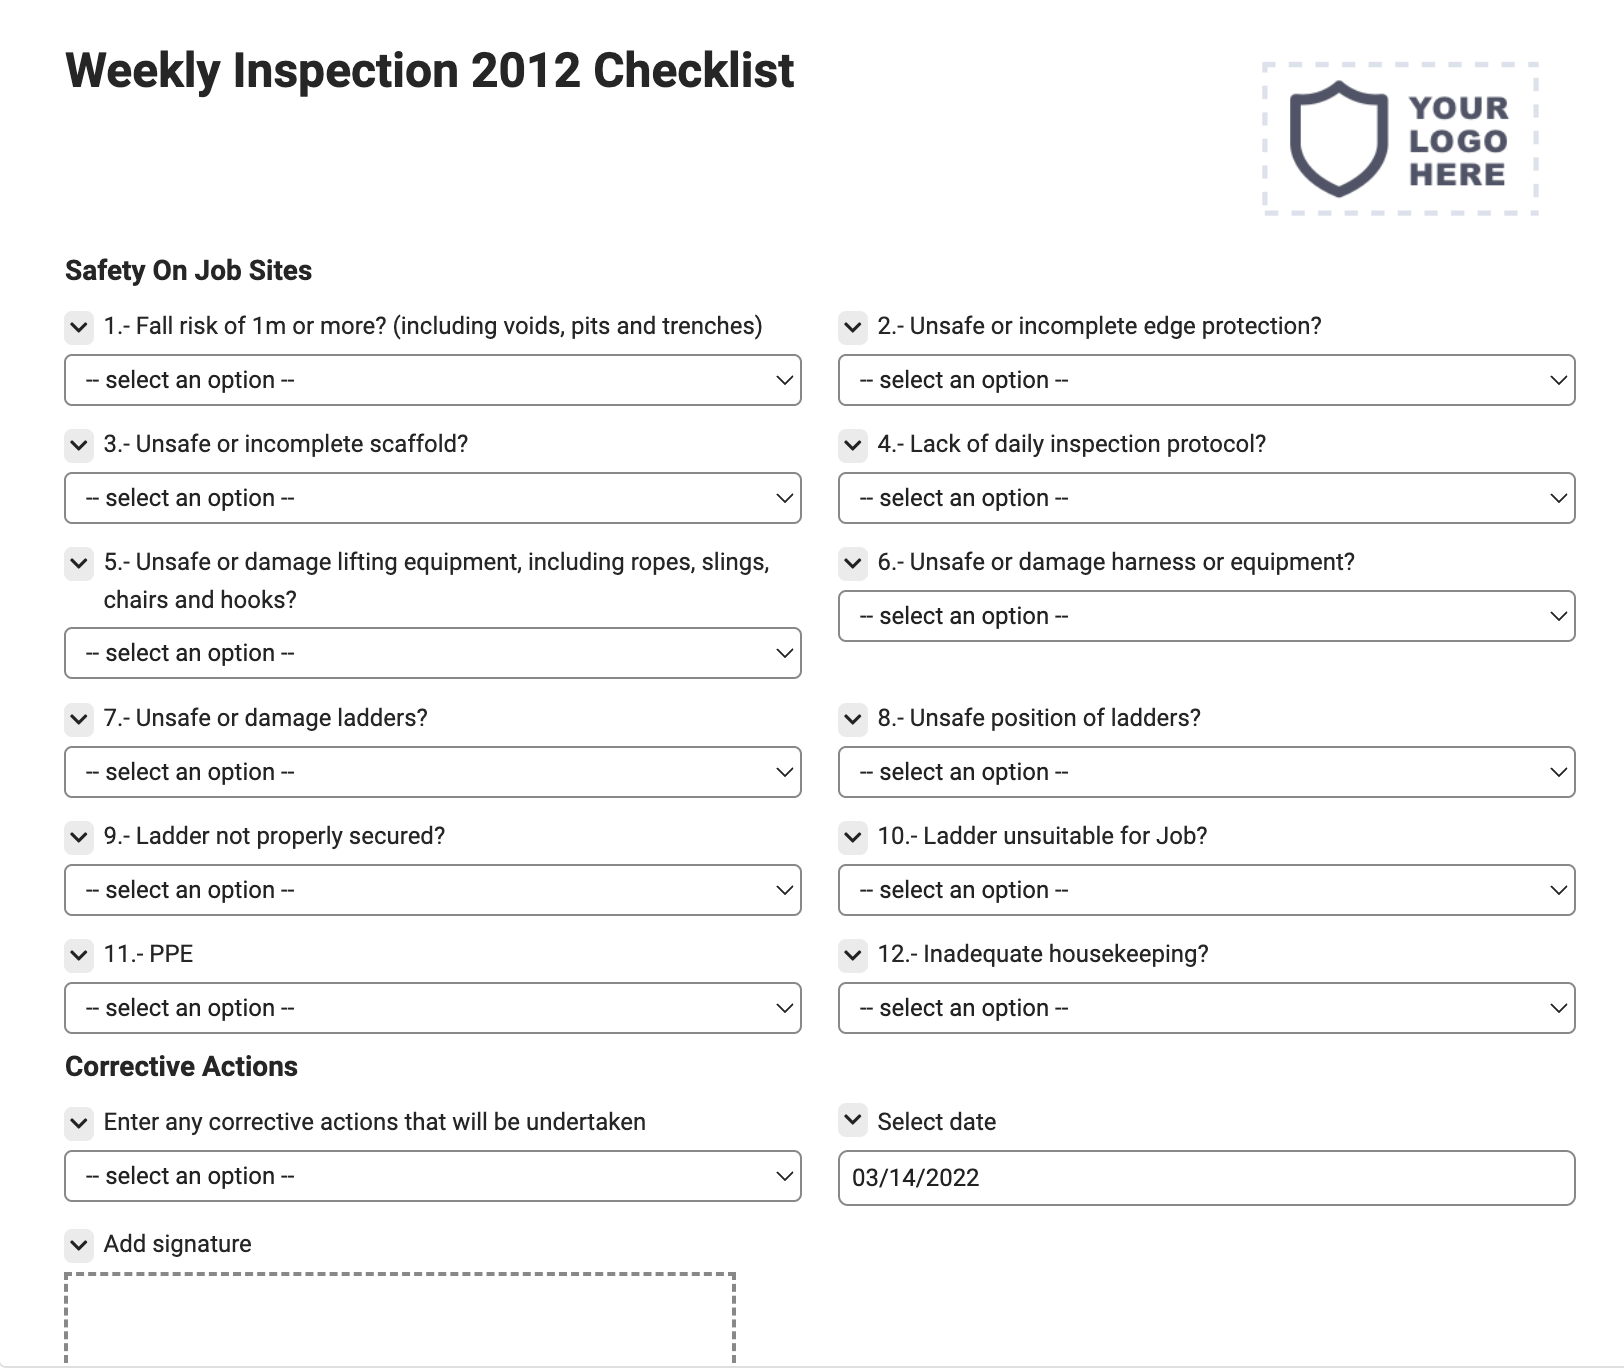 Weekly Inspection 2012 Checklist